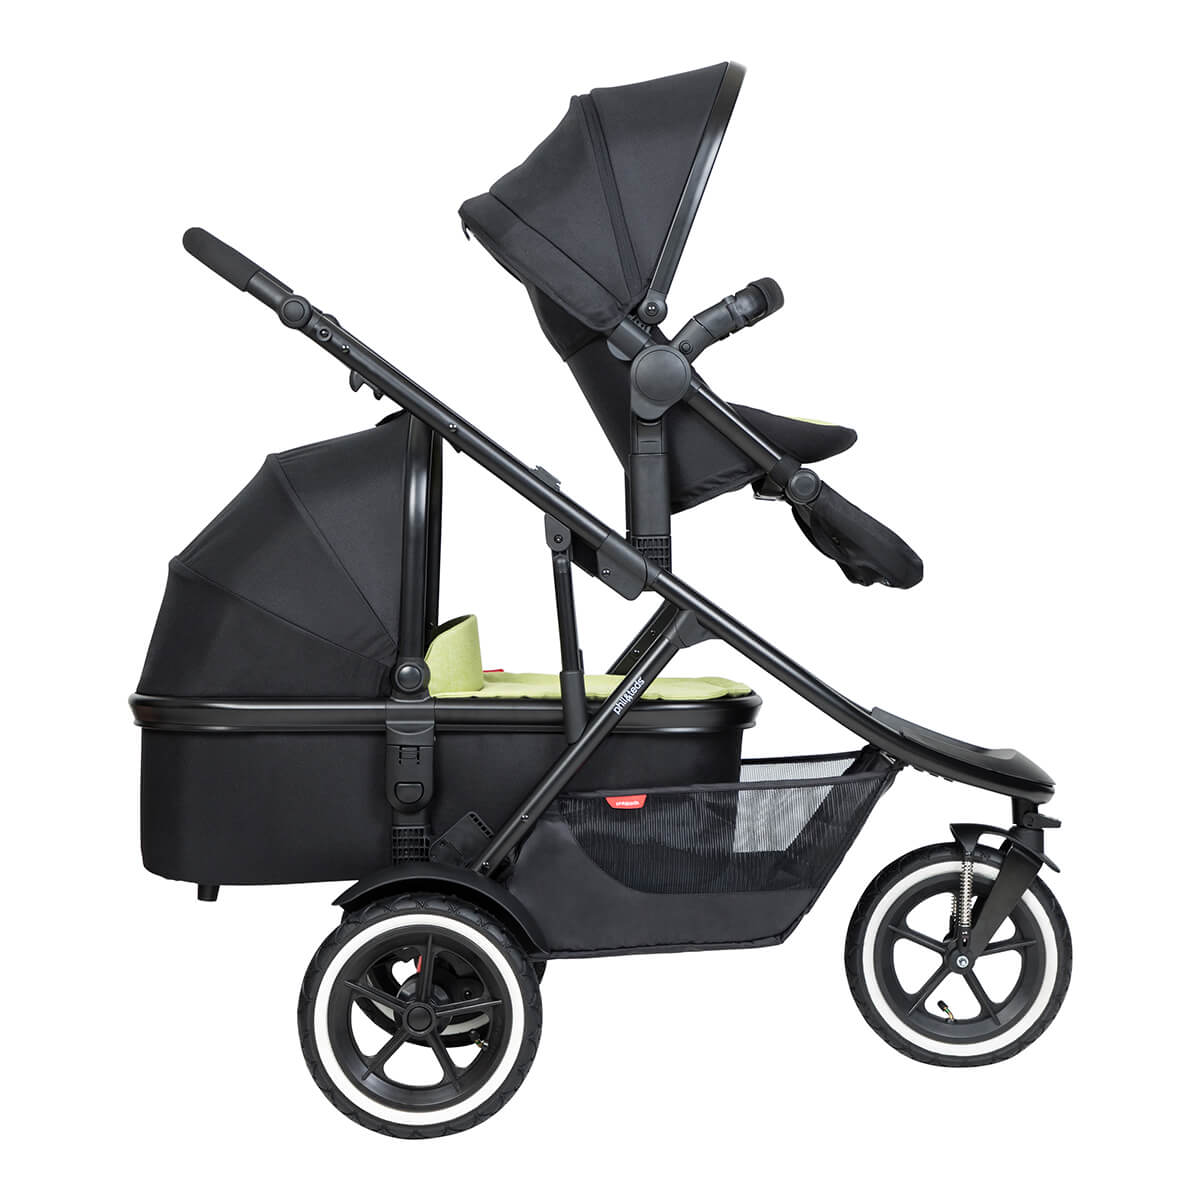 https://cdn.accentuate.io/4343443488802/19437753499826/philteds-sport-buggy-with-double-kit-extended-clip-and-snug-carrycot-side-view-v1626482671535.jpg?1200x1200